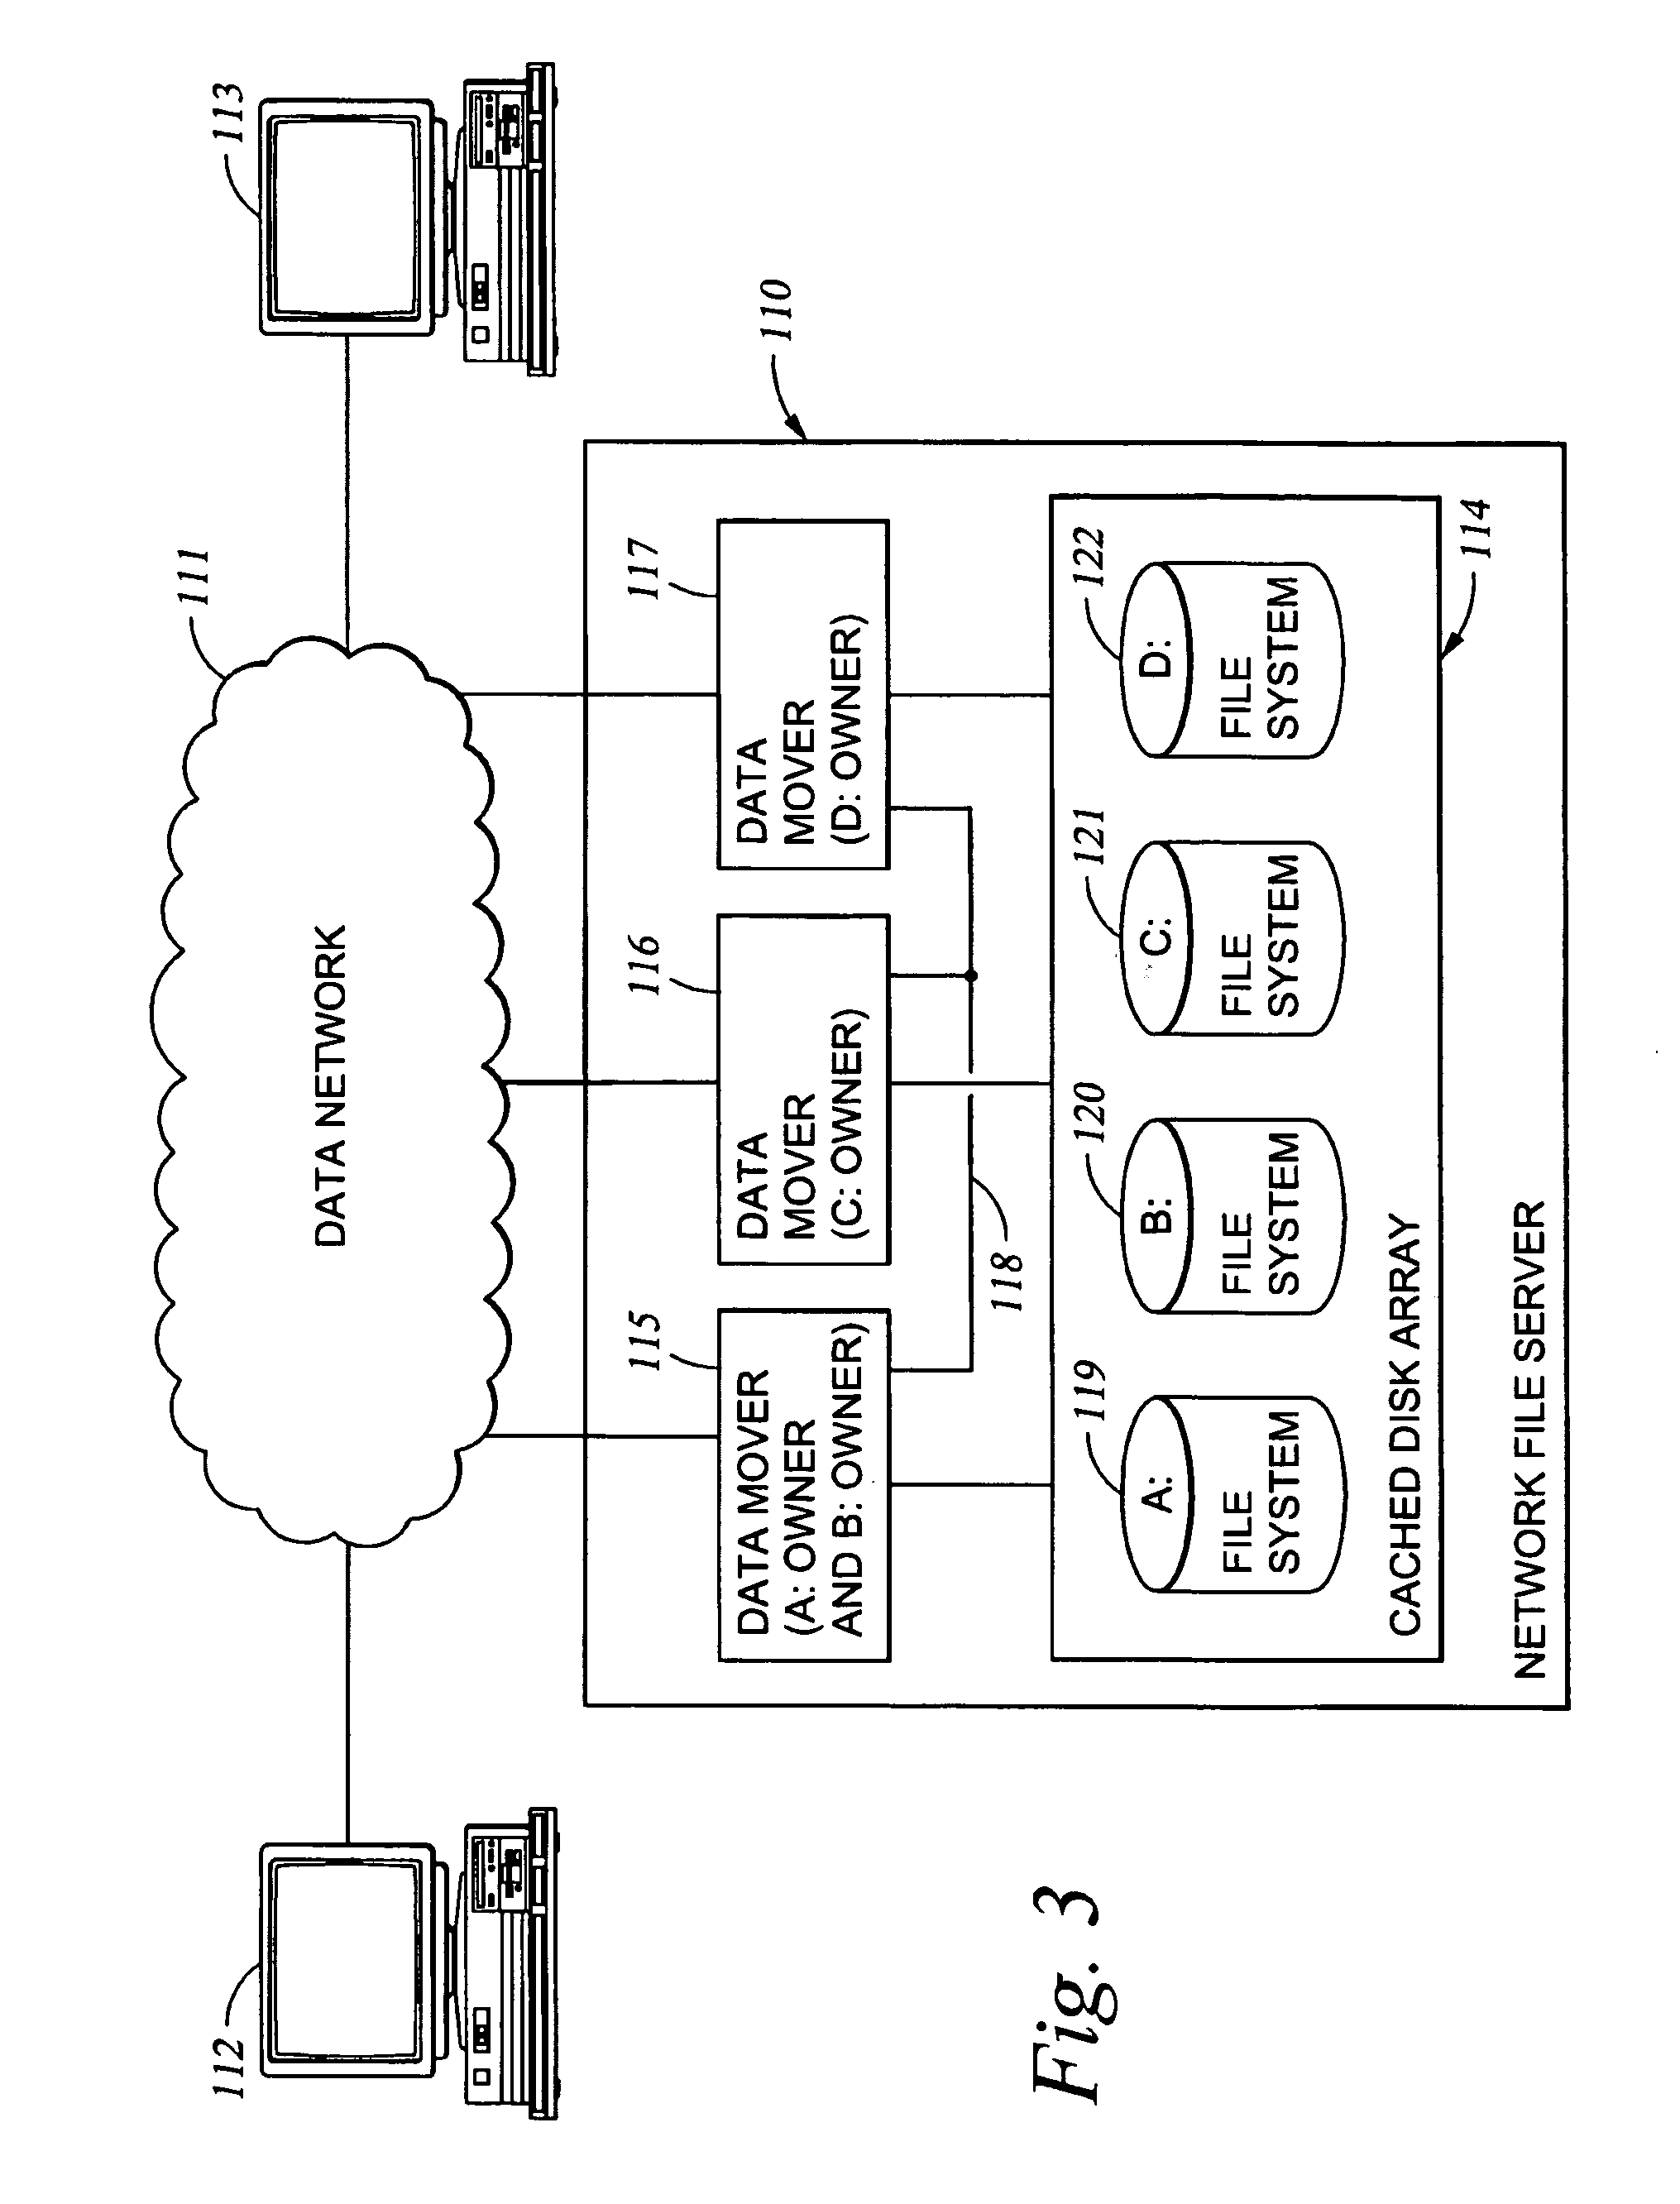 Delegation of metadata management in a storage system by leasing of free file system blocks from a file system owner